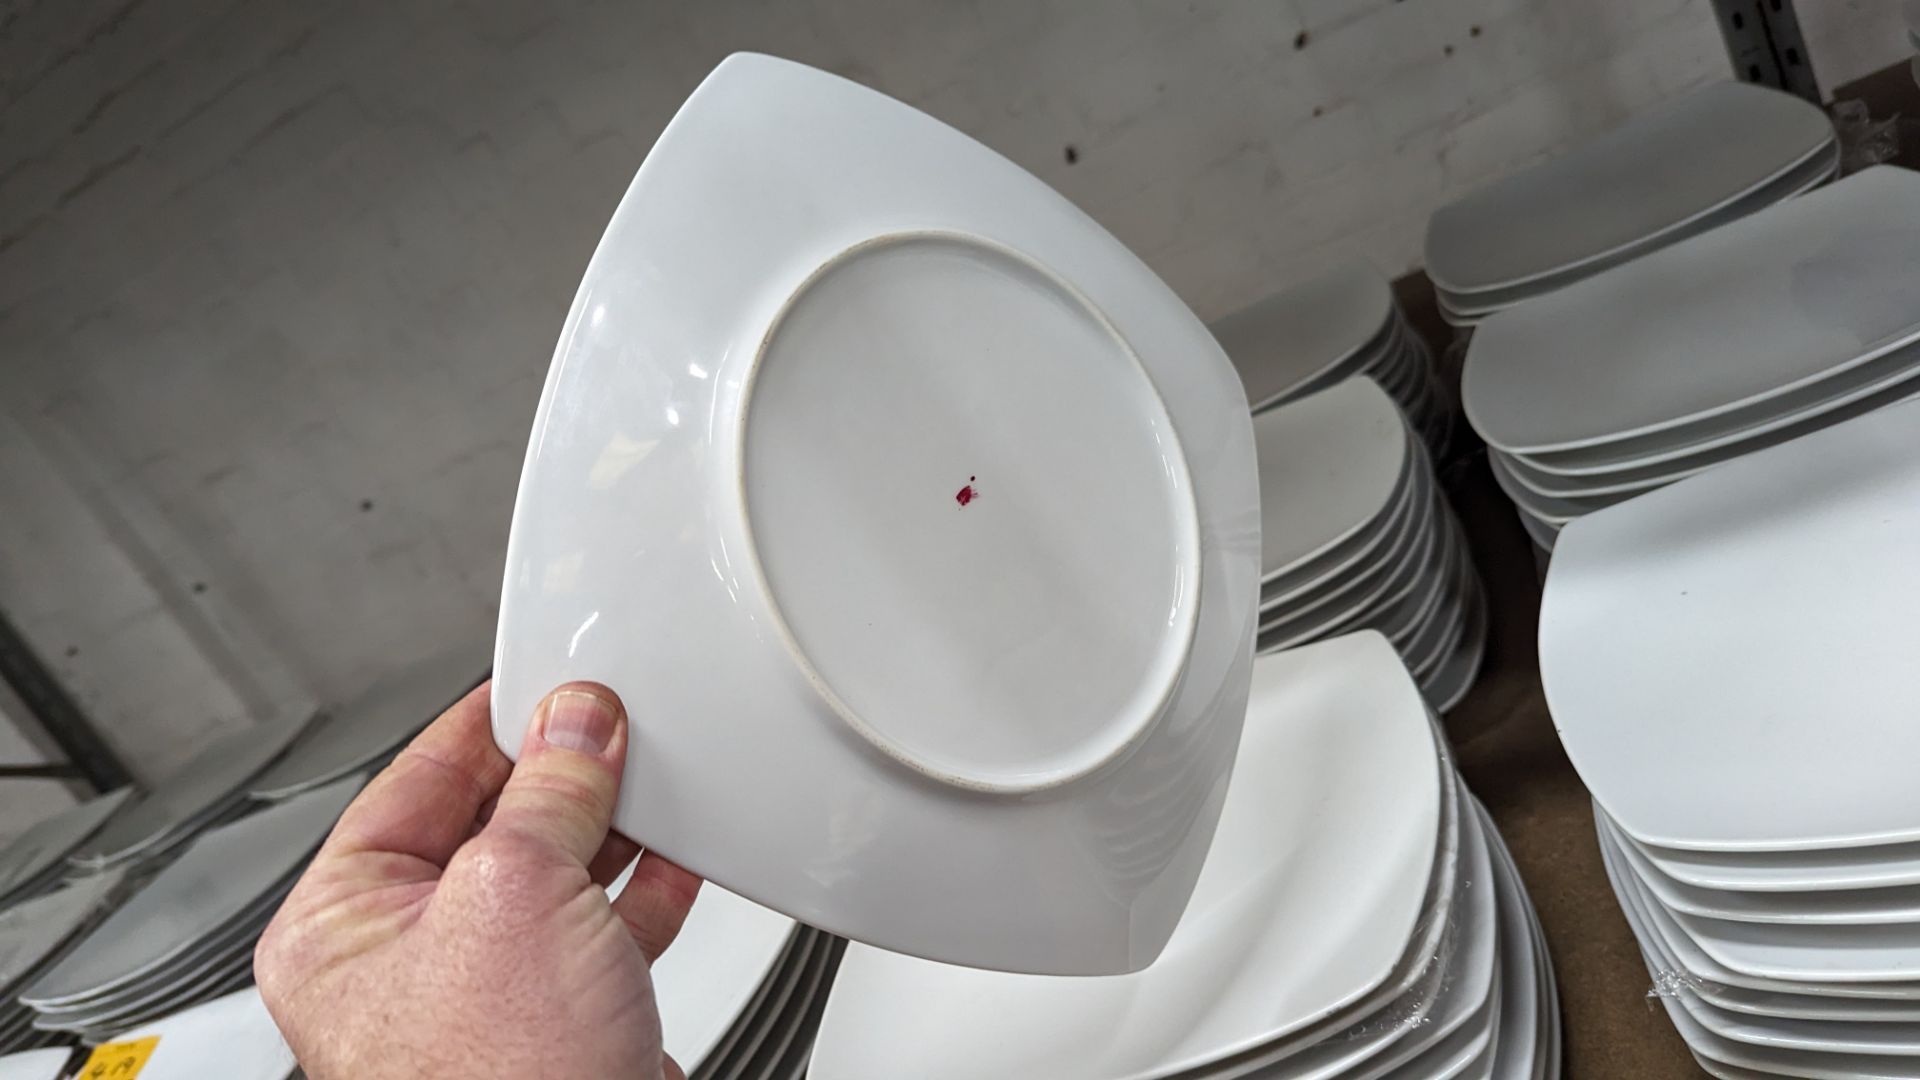 60 off white "squarish" plates with curved sides, each measuring approximately 255mm square - 6 stac - Image 6 of 6